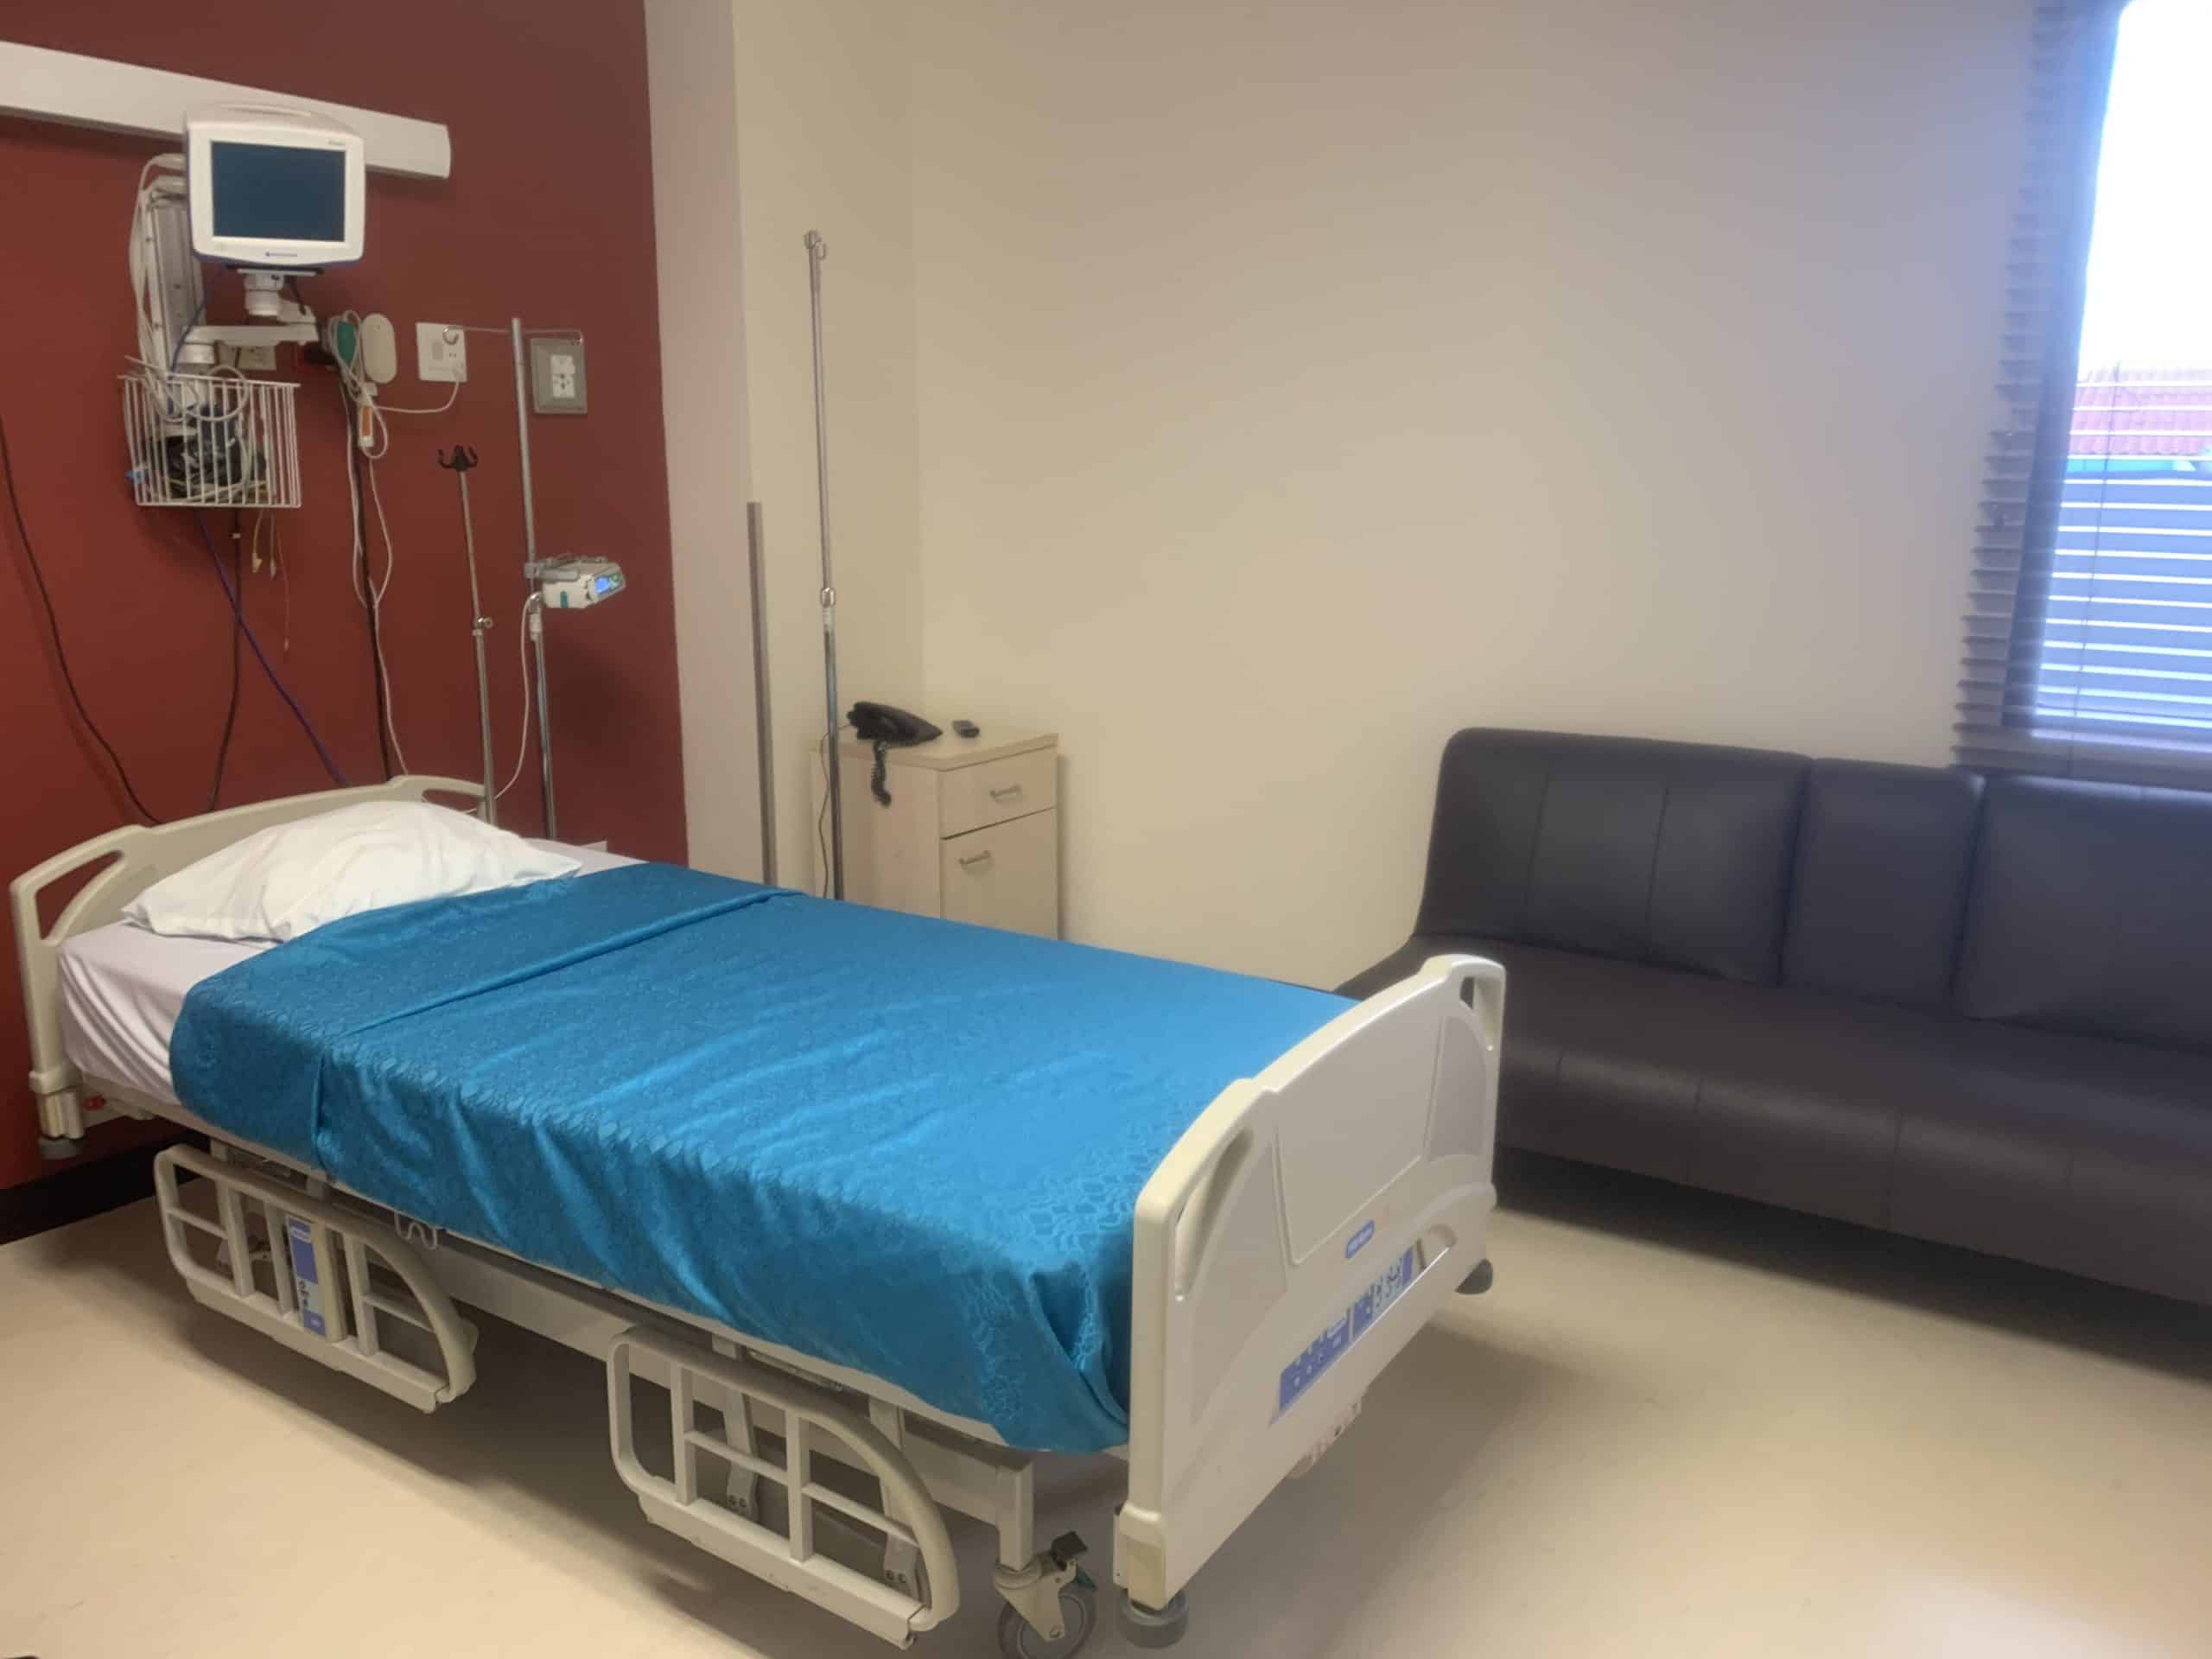 Running your business from a hospital bed – here’s what I learned